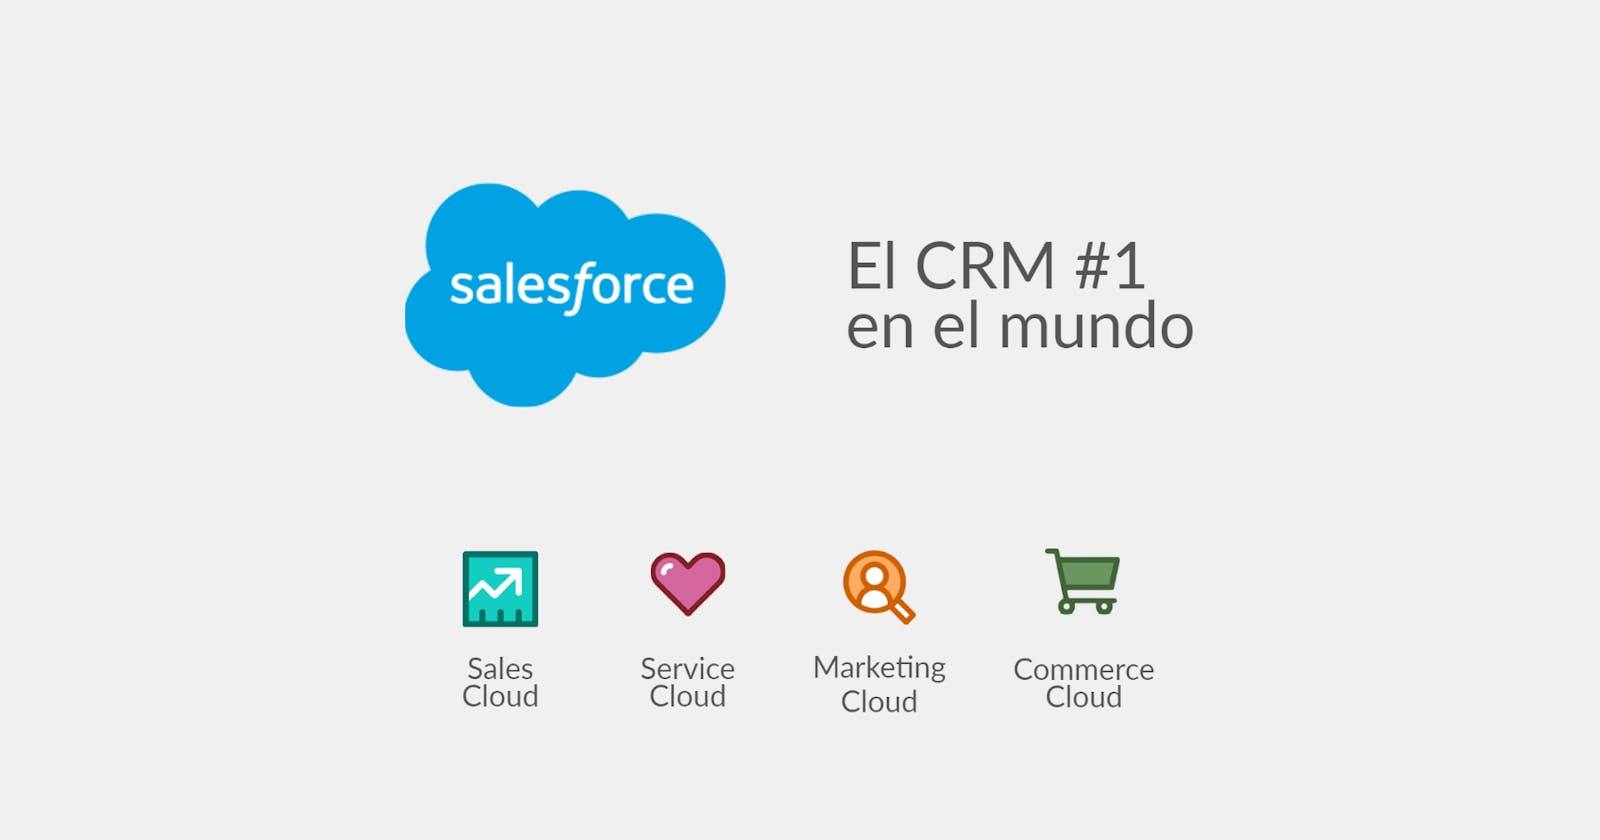 ¿What is Salesforce?